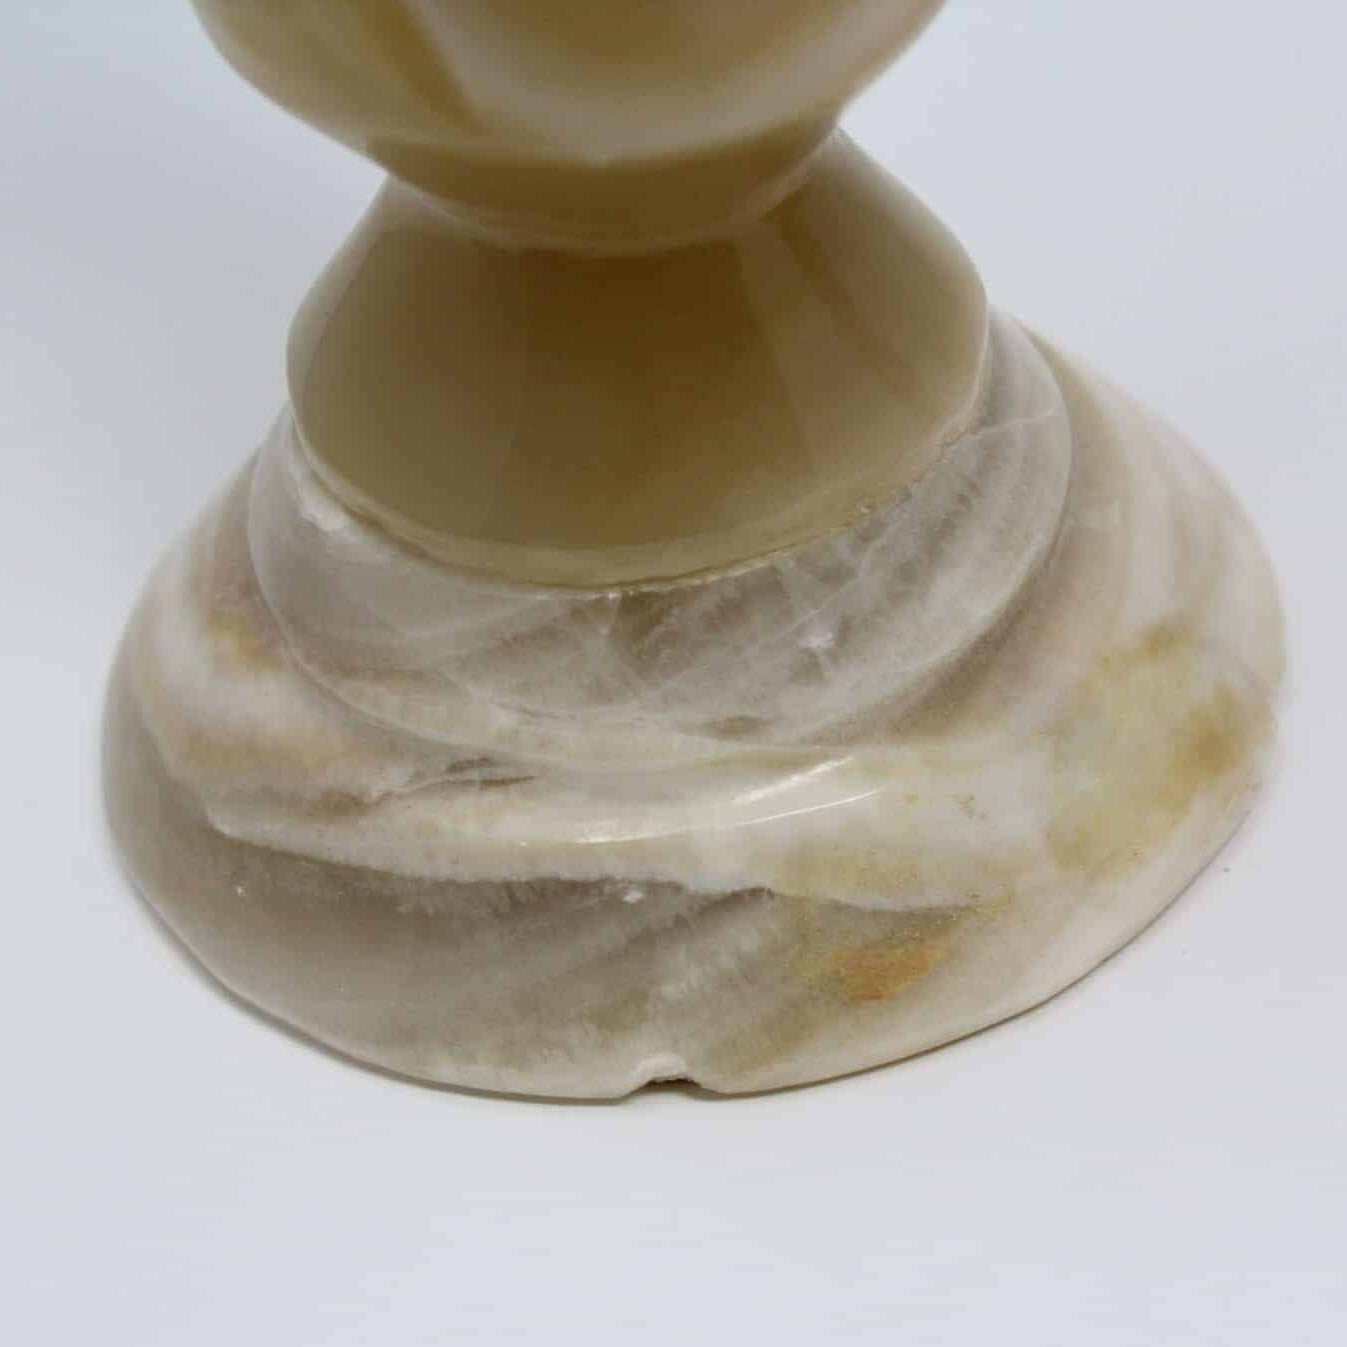 Candle Holders, Carved Marble Tapers, Set of 2, Vintage